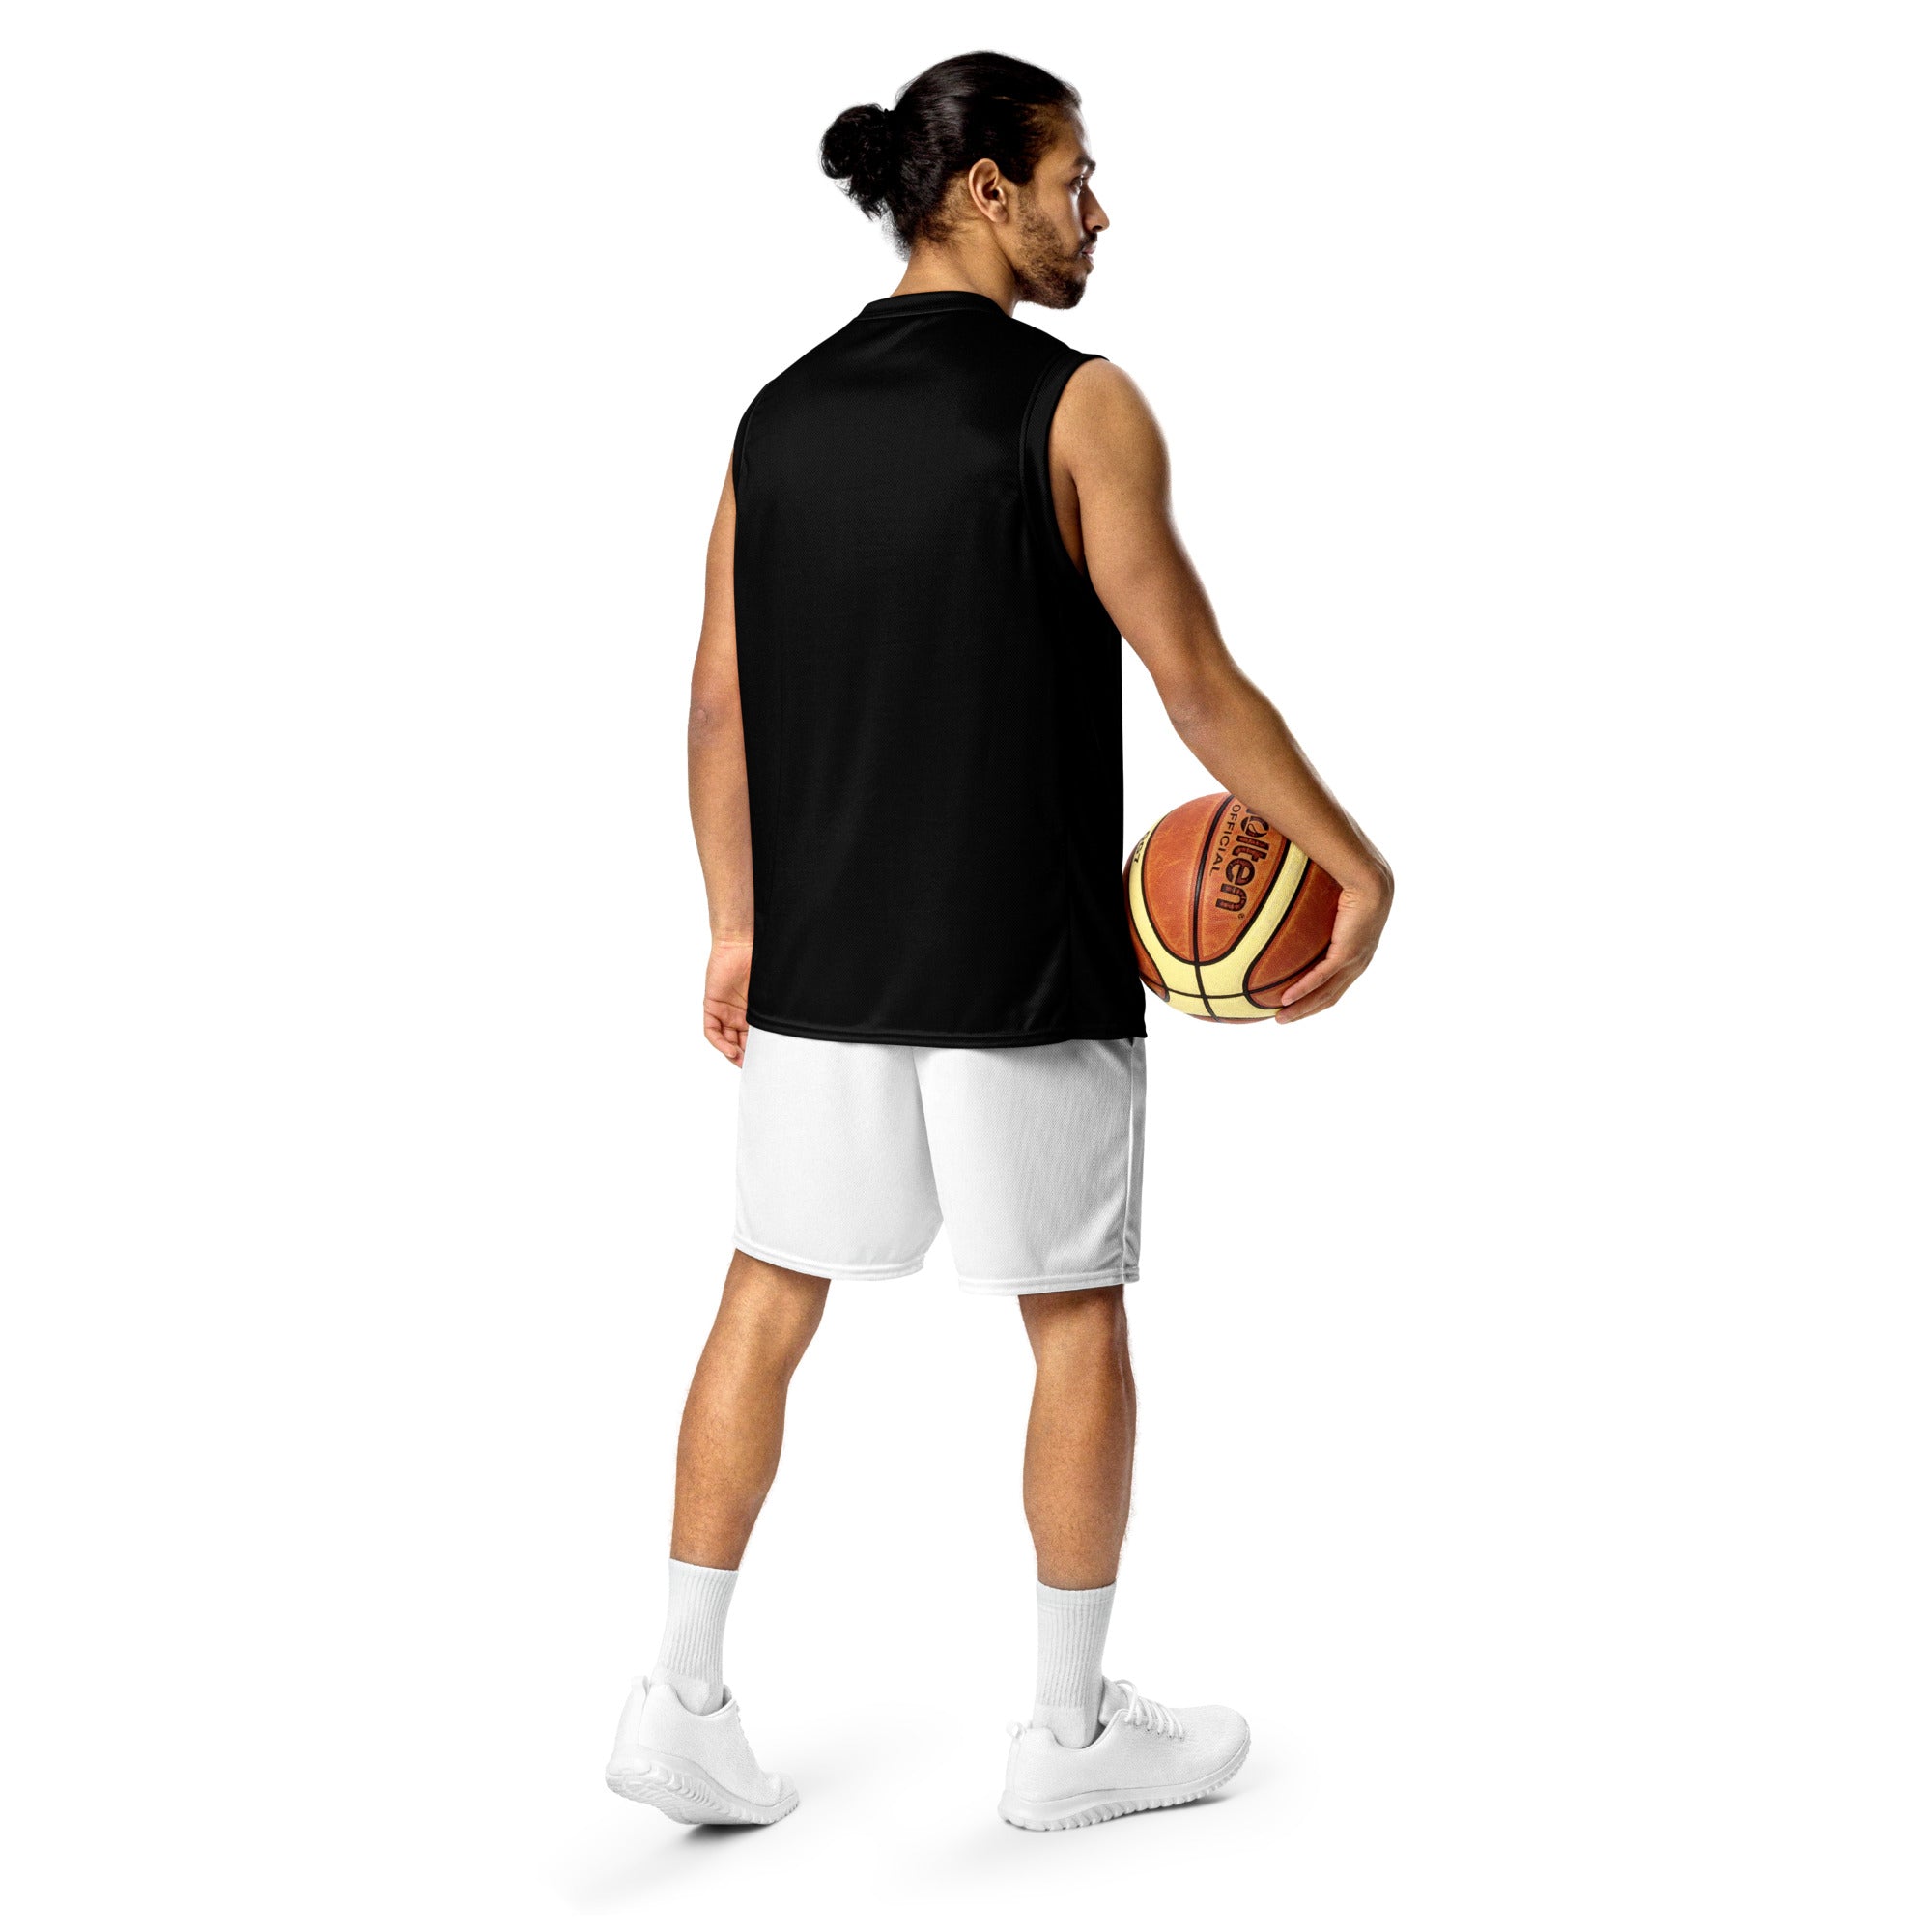 SuperX Recycled unisex basketball jersey